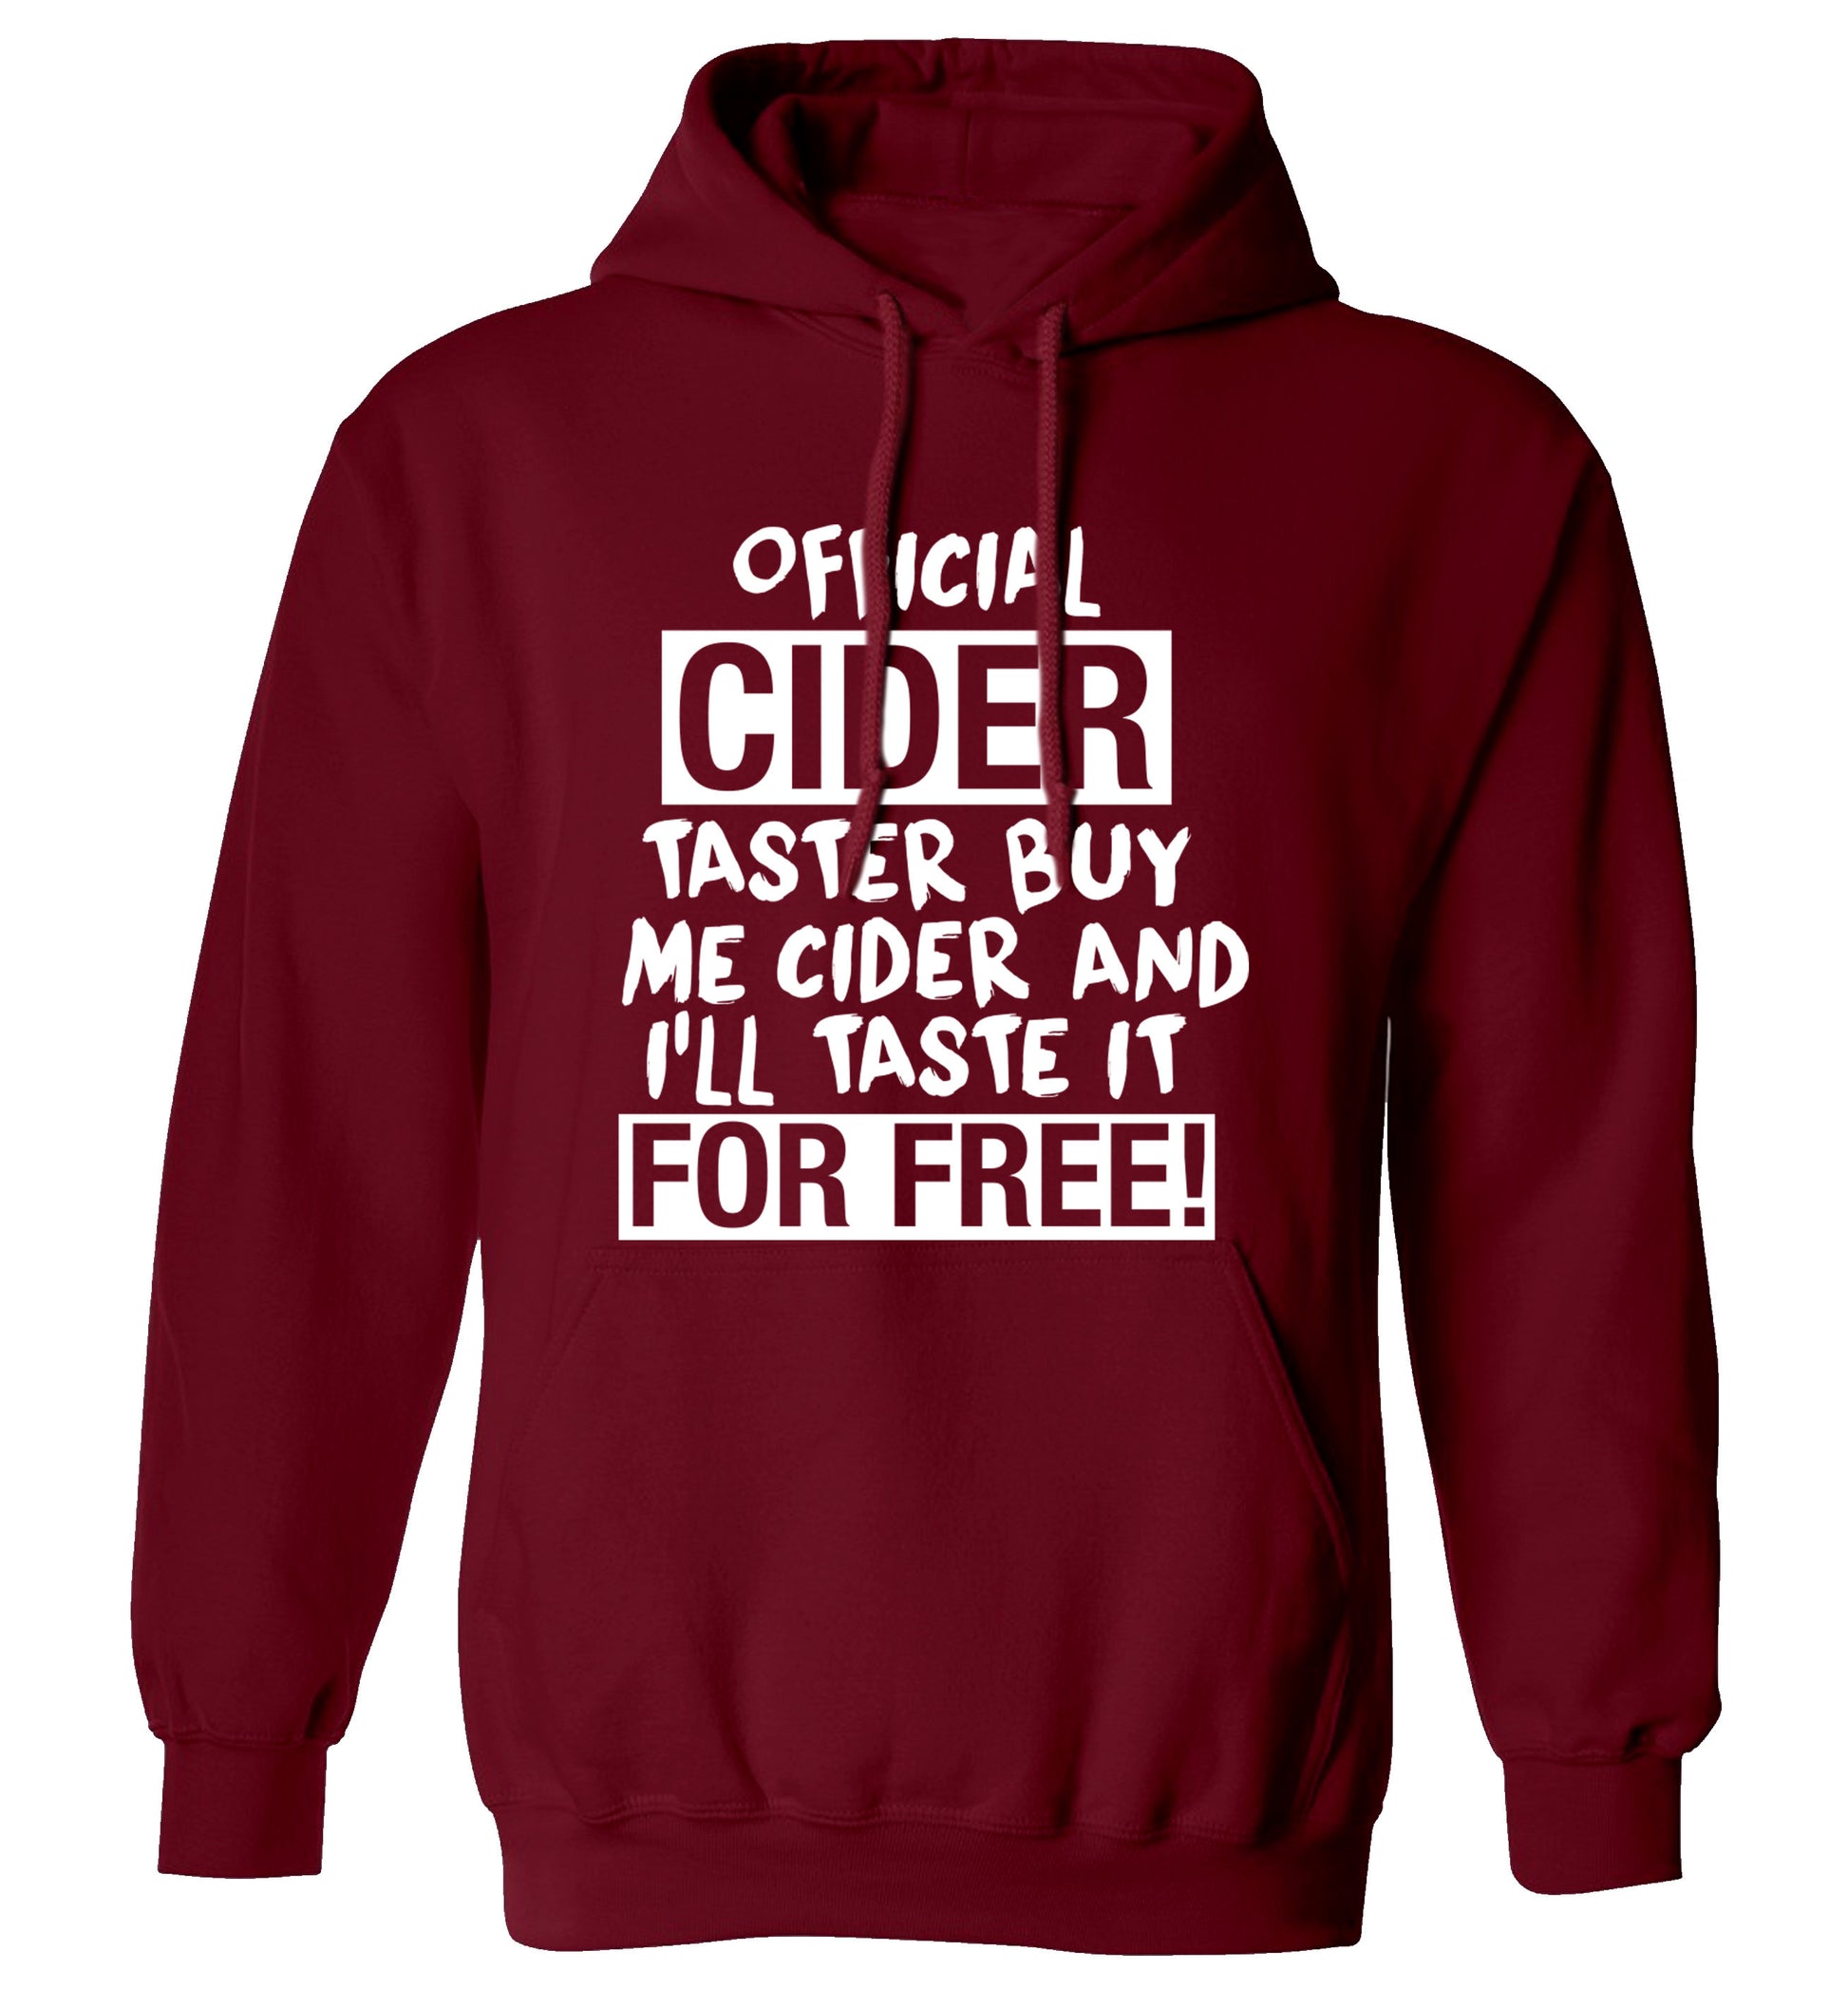 Official cider taster buy me cider and I'll taste it for free! adults unisex maroon hoodie 2XL